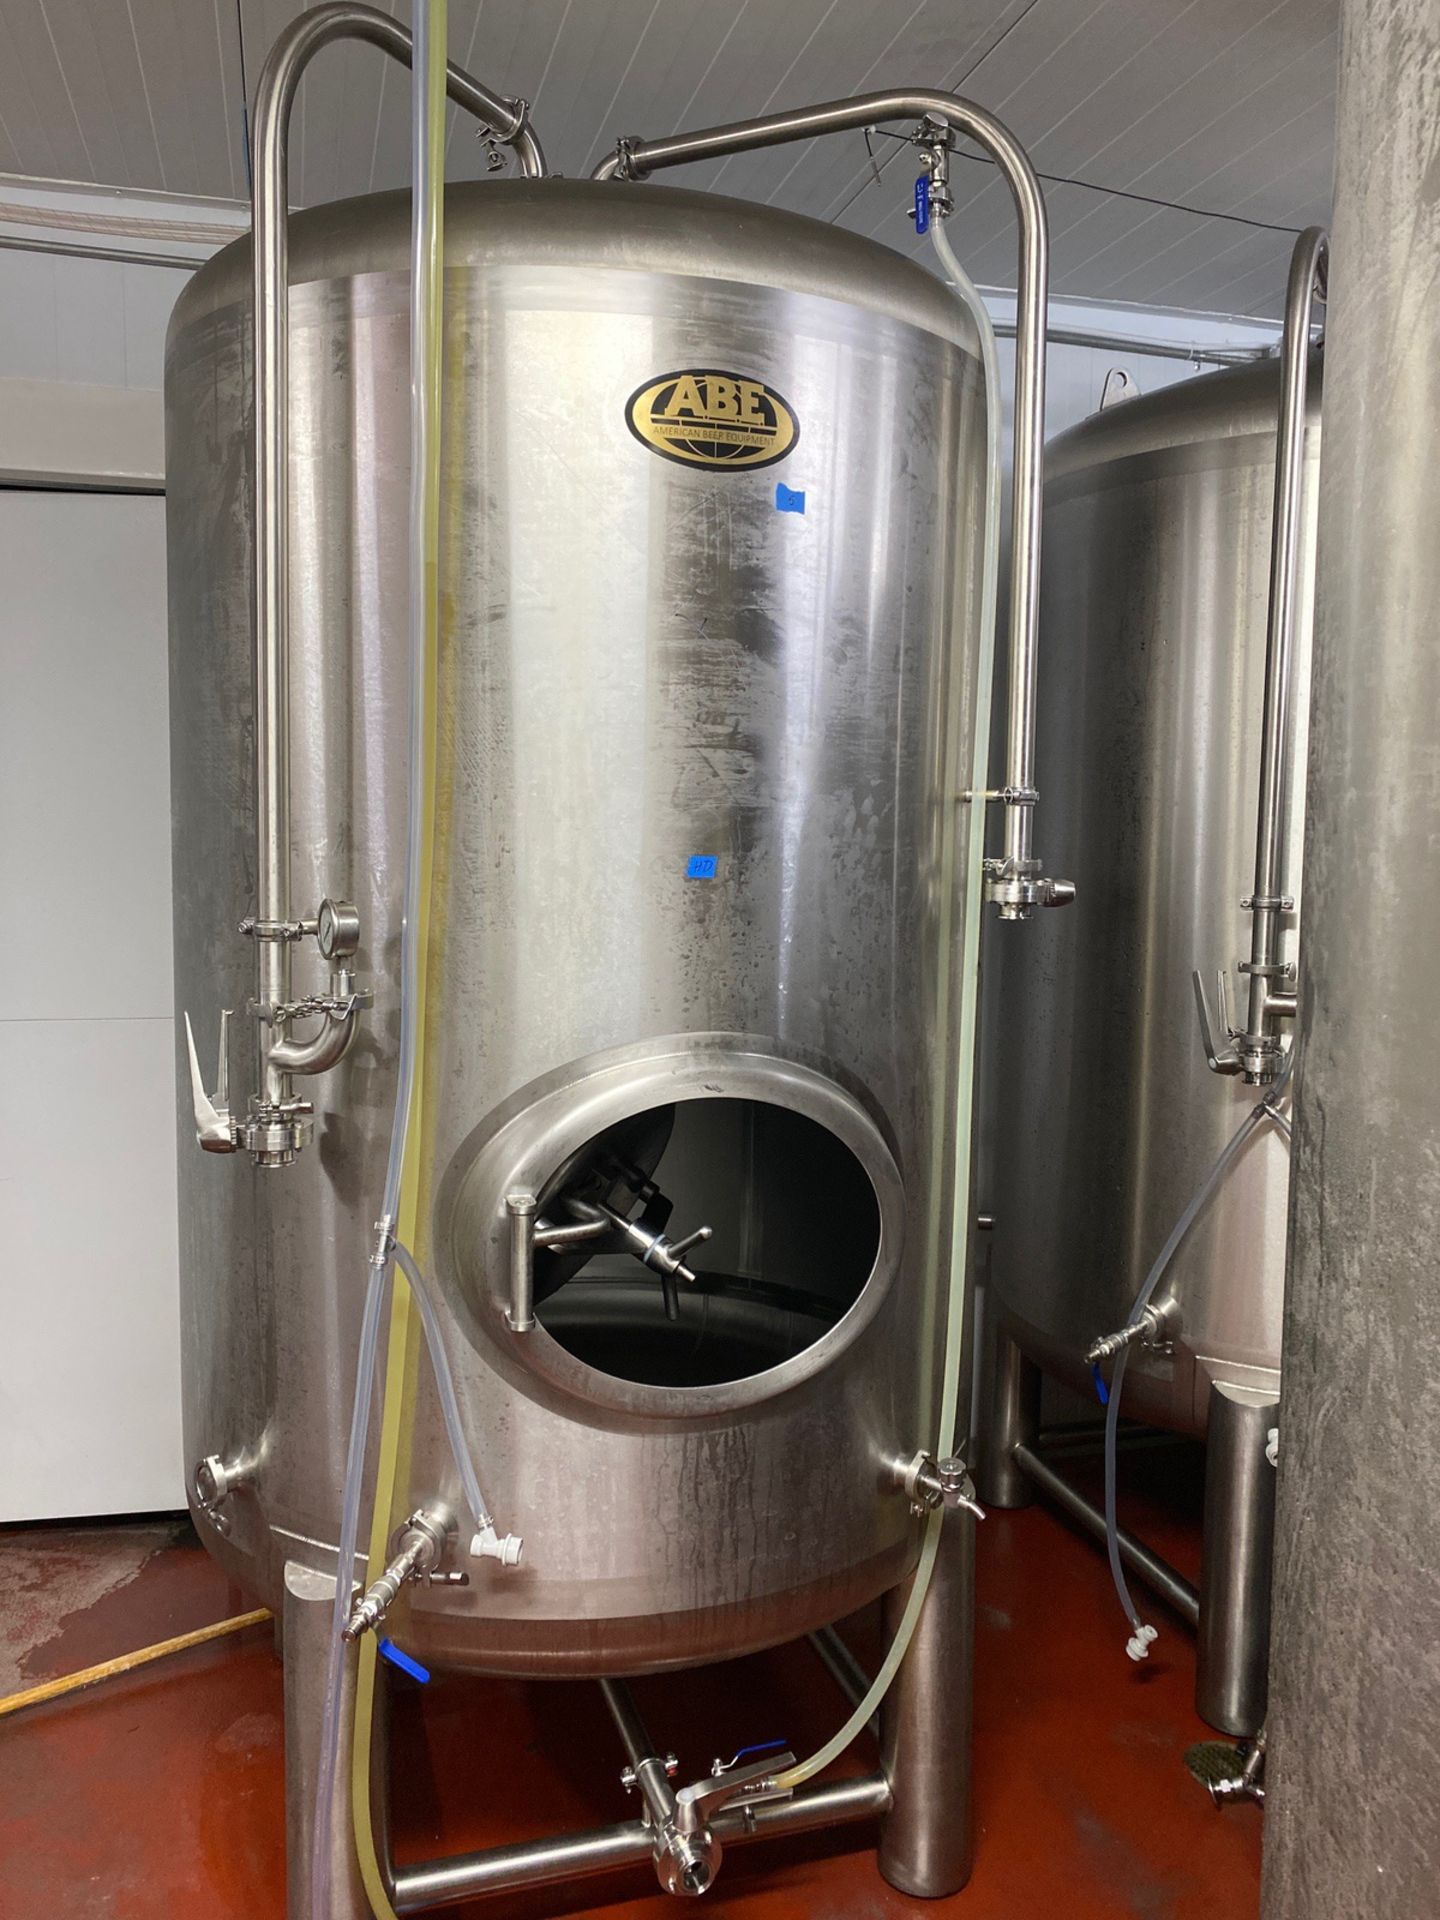 2019 ABE 15 BBL Serving Brite Tank, Single Wall Stainless Steel, App [Subj to Bulk] | Rig Fee: $400